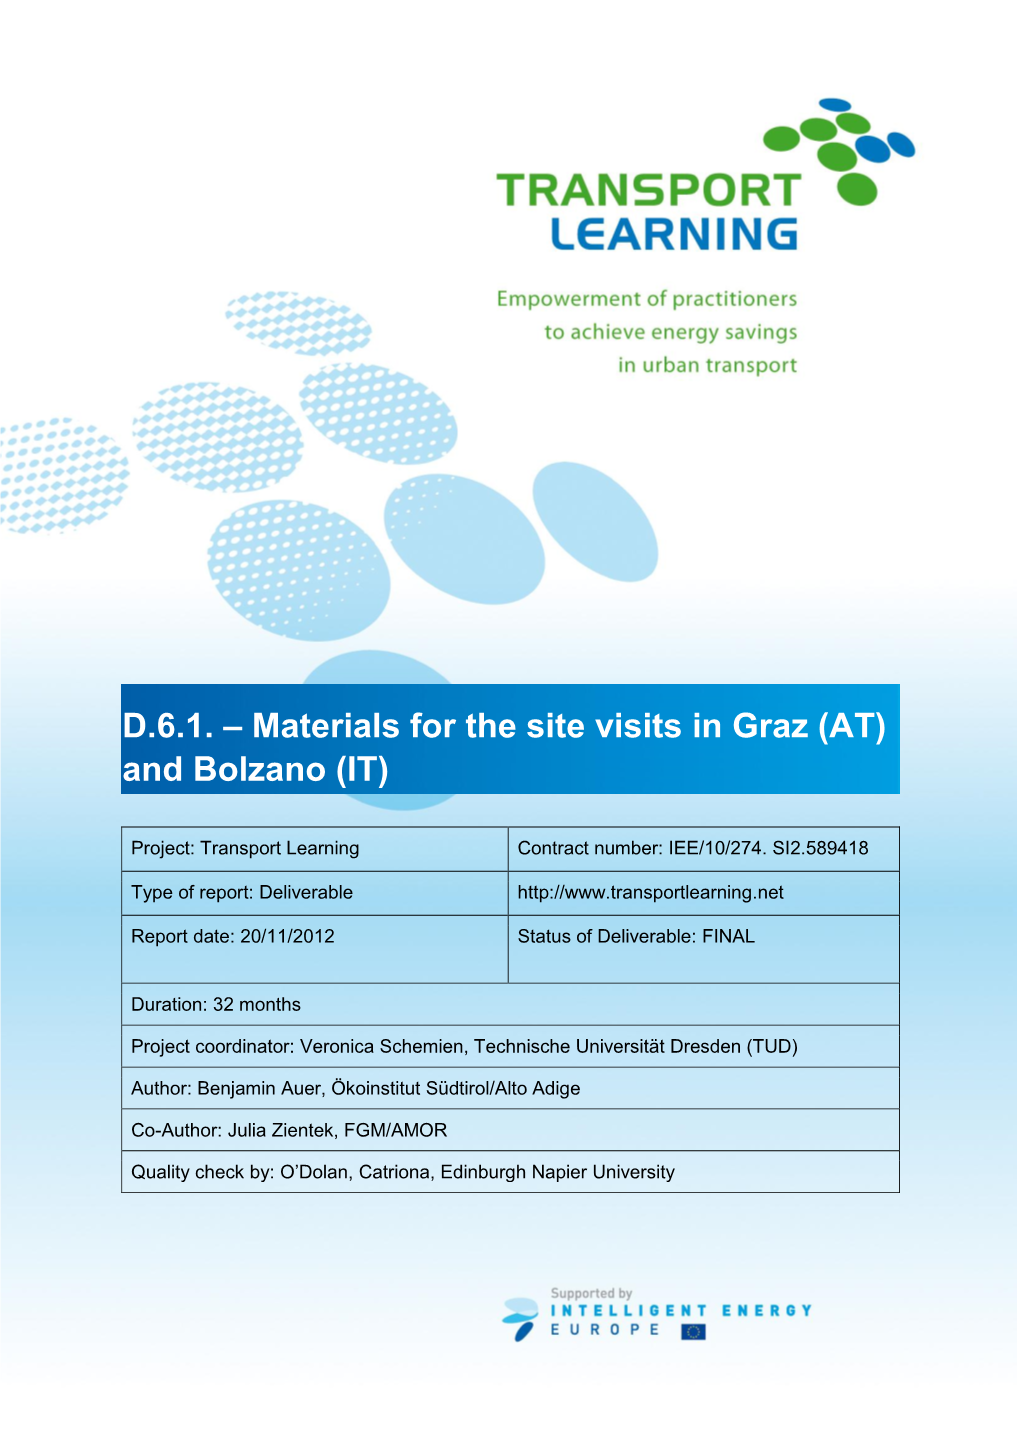 D.6.1. – Materials for the Site Visits in Graz (AT) and Bolzano (IT)